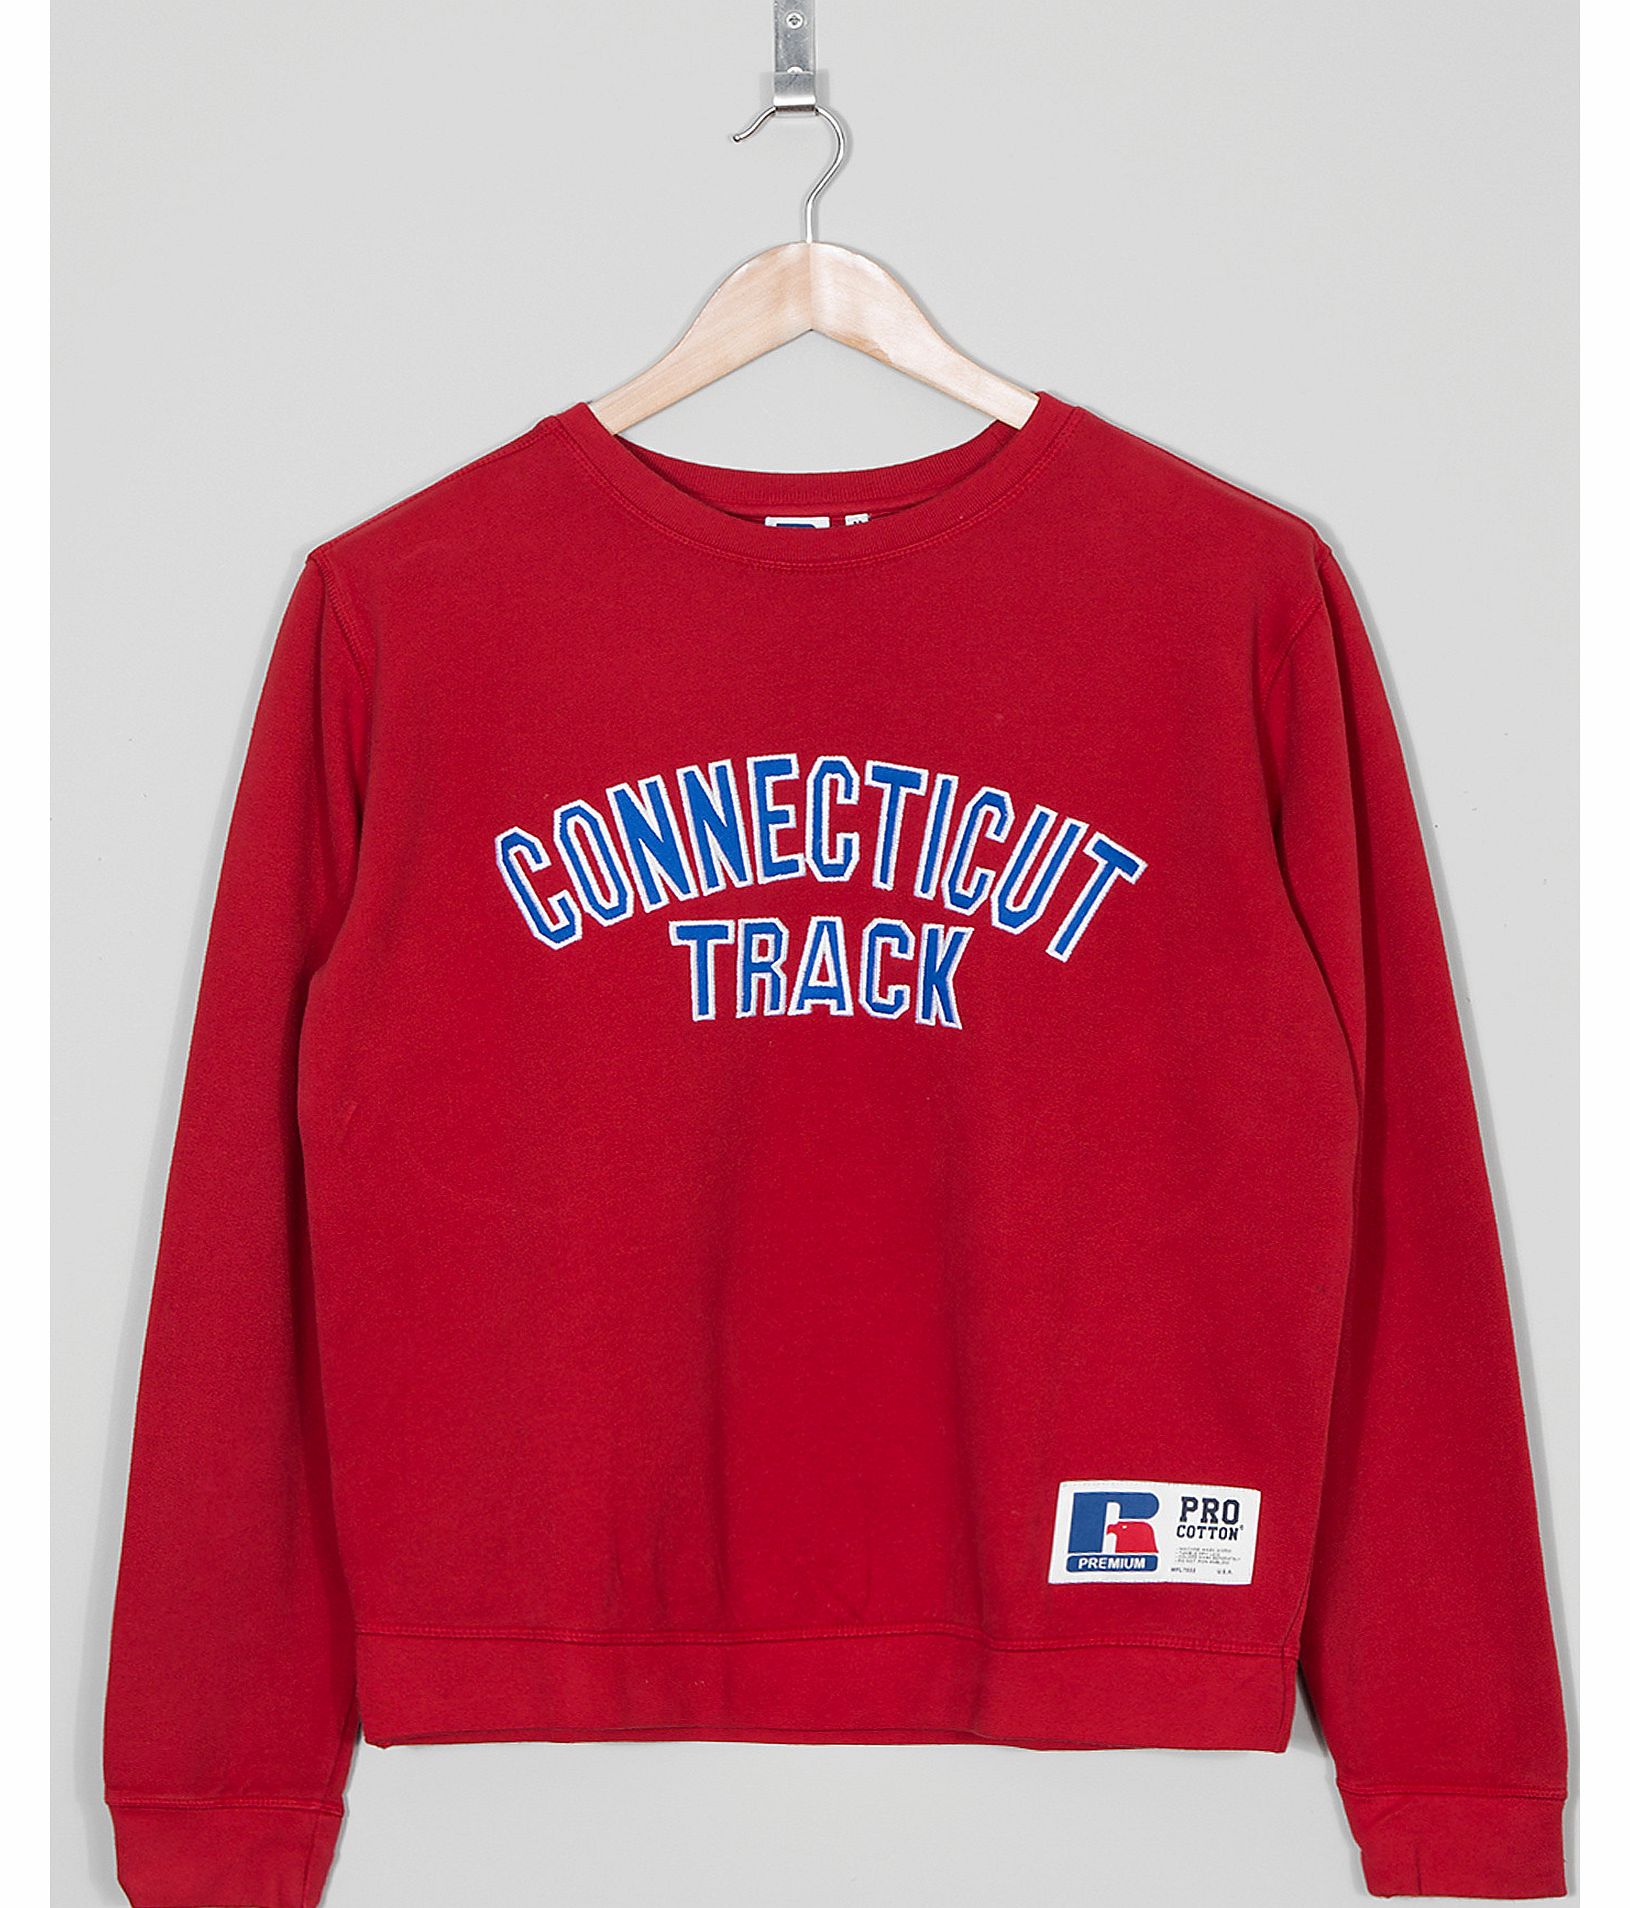 Russell Athletic Connecticut Sweatshirt